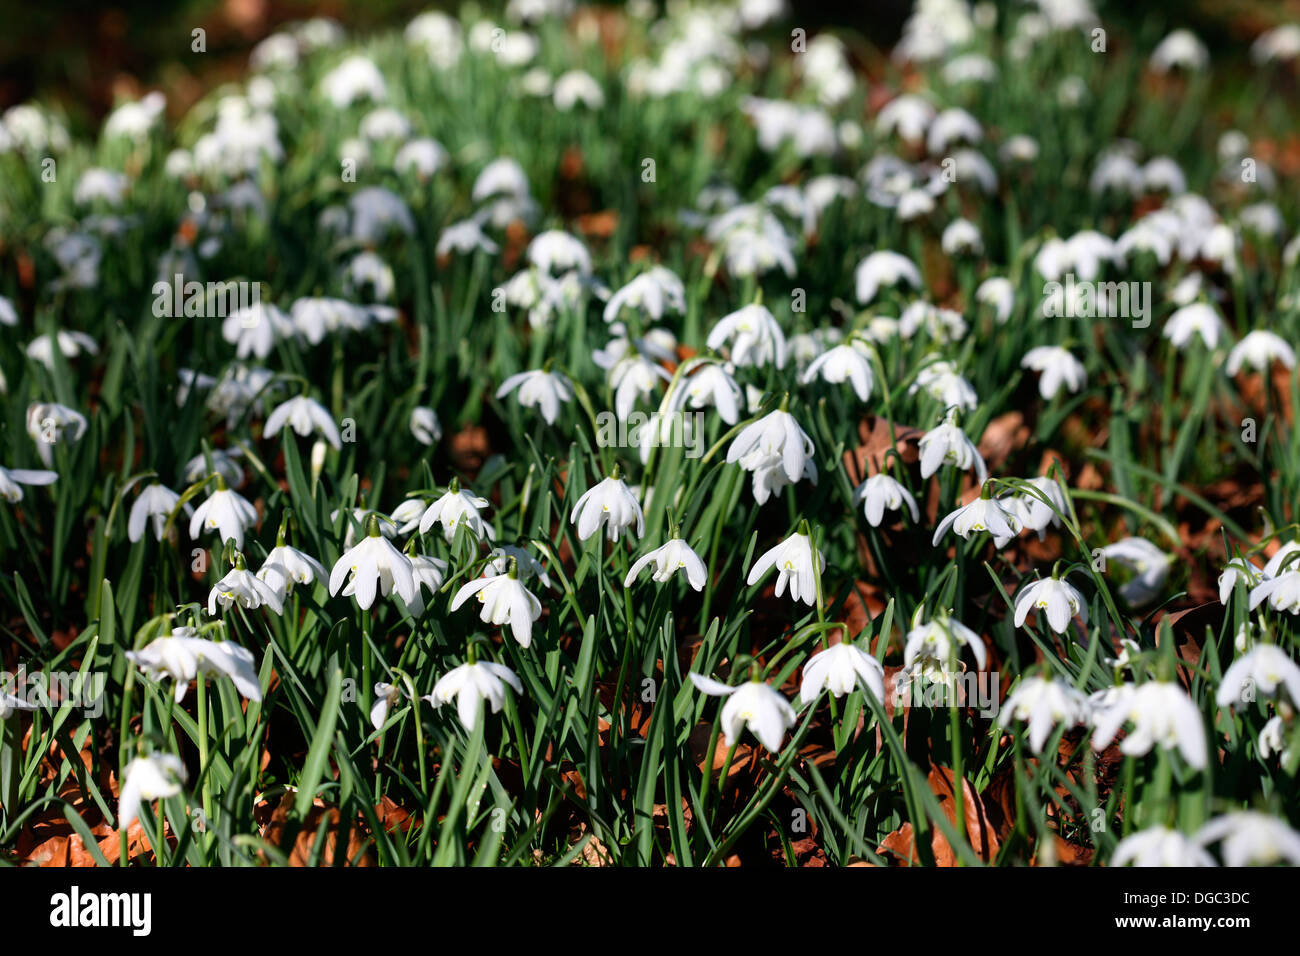 spring is on its way a beautiful field of white snowdrops  Jane Ann Butler Photography  JABP1076 Stock Photo